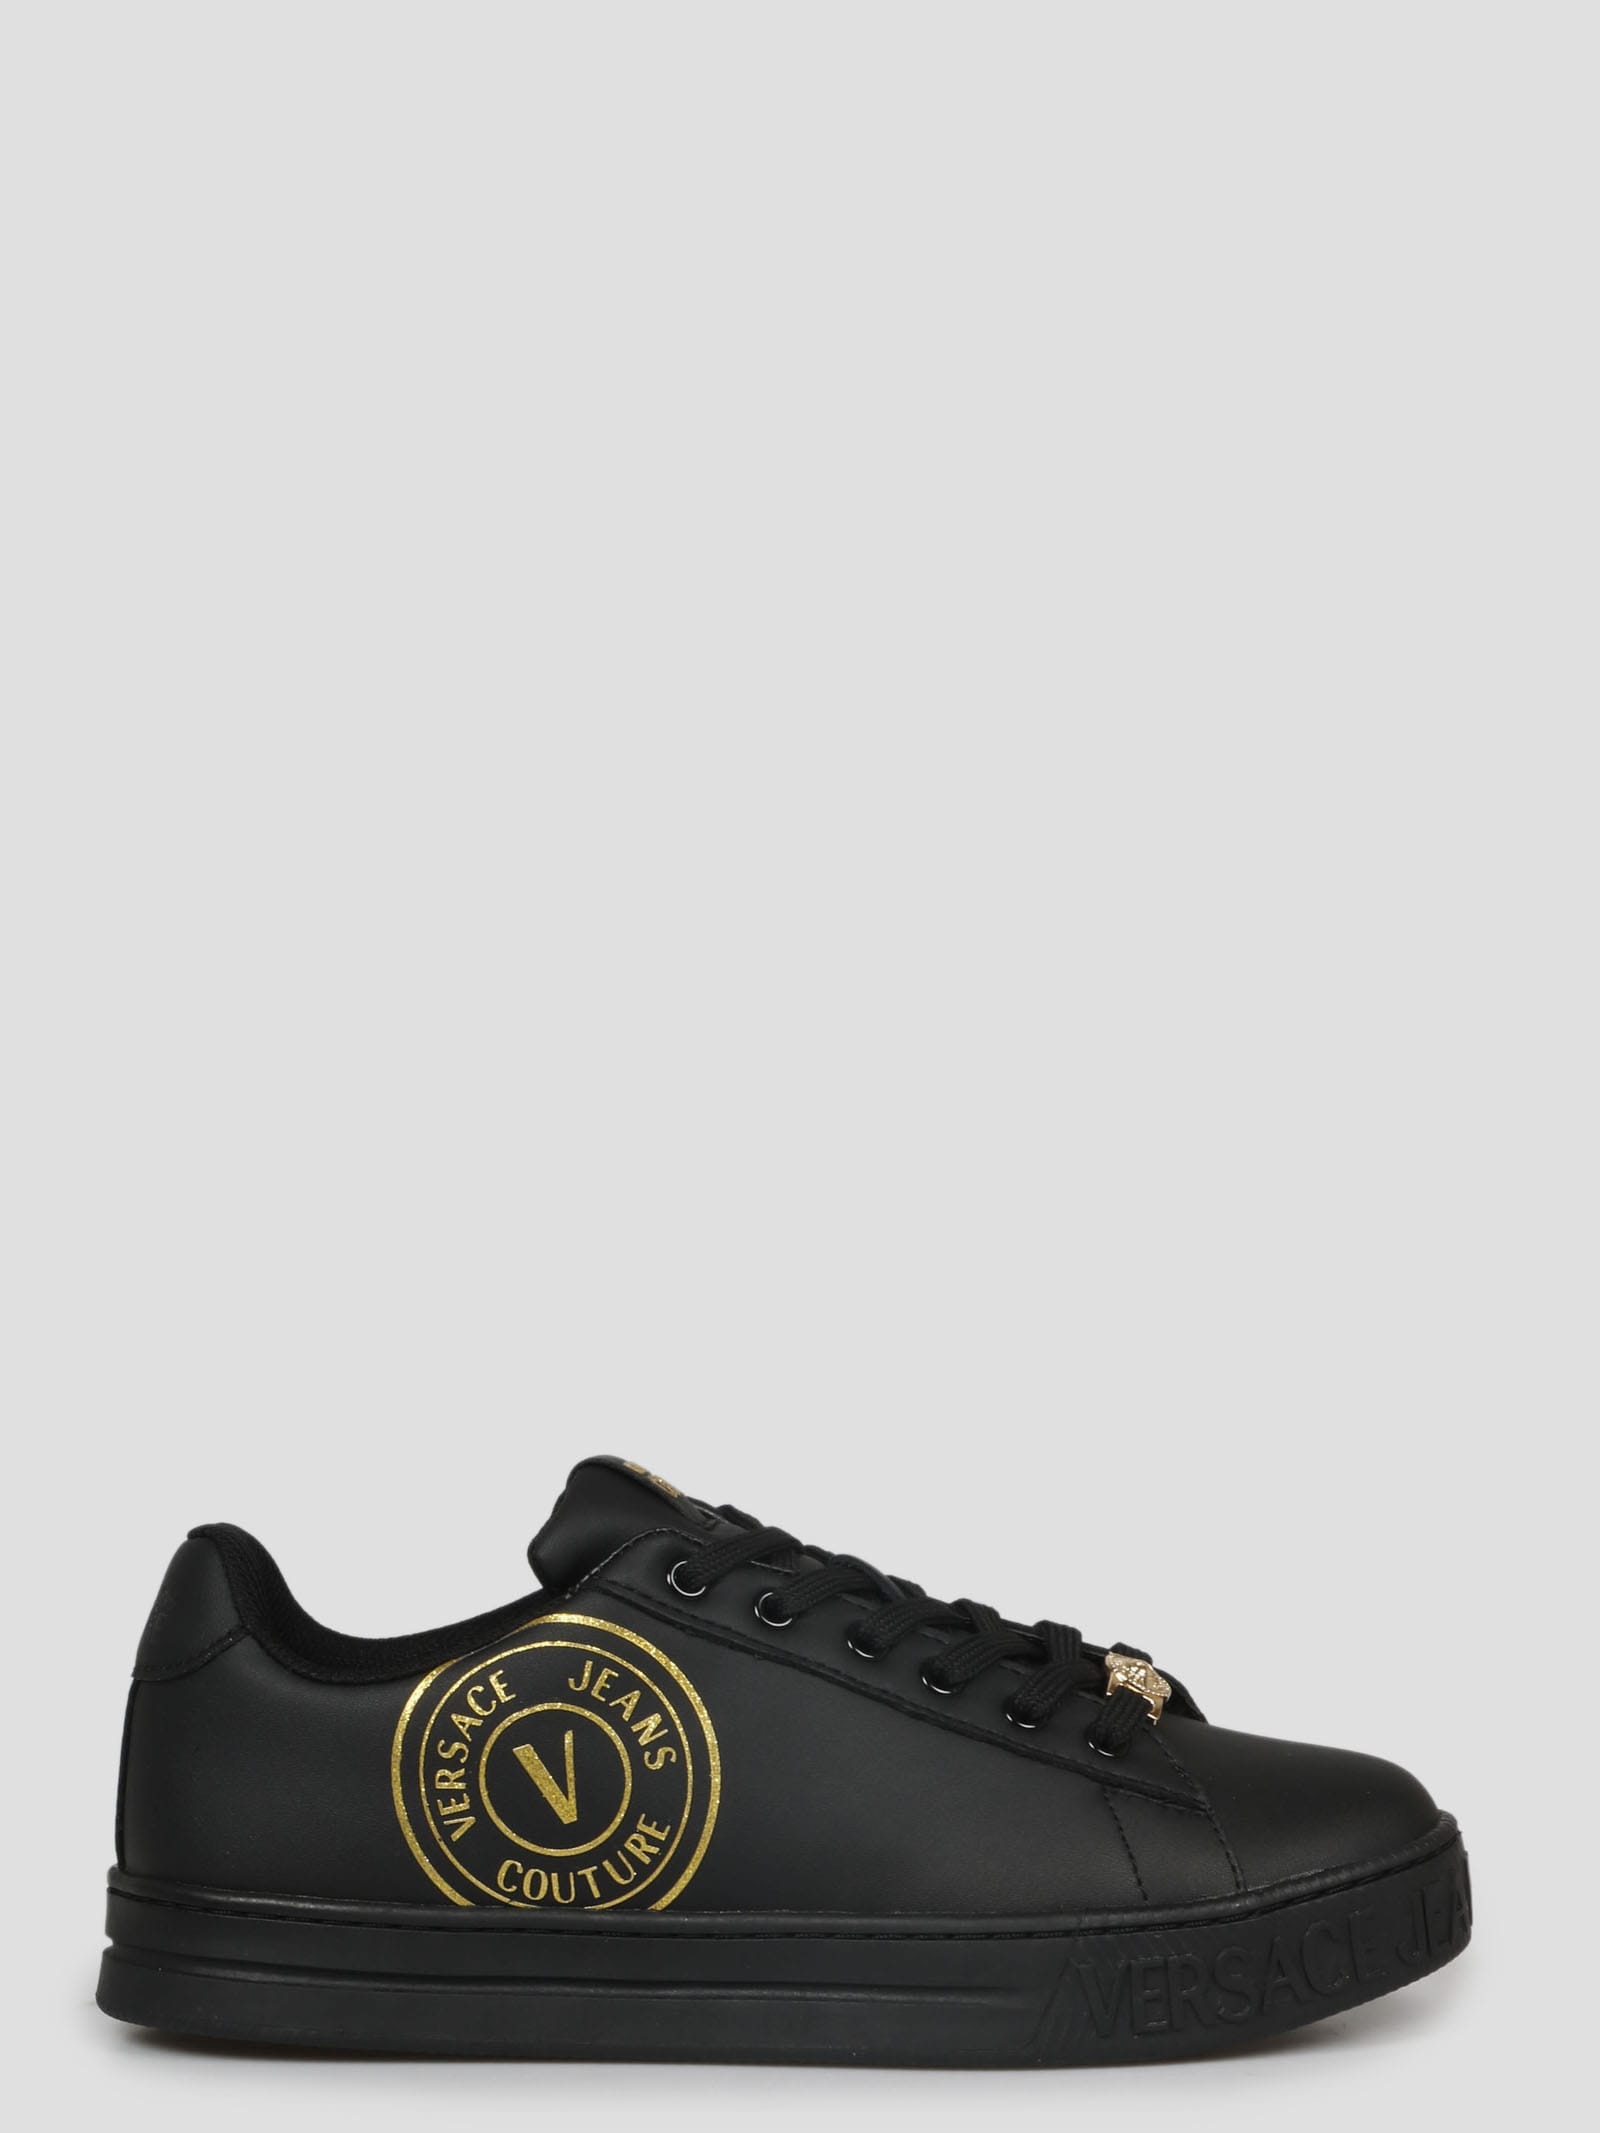 Versace Jeans Couture Court 88 V-emblem Sneakers